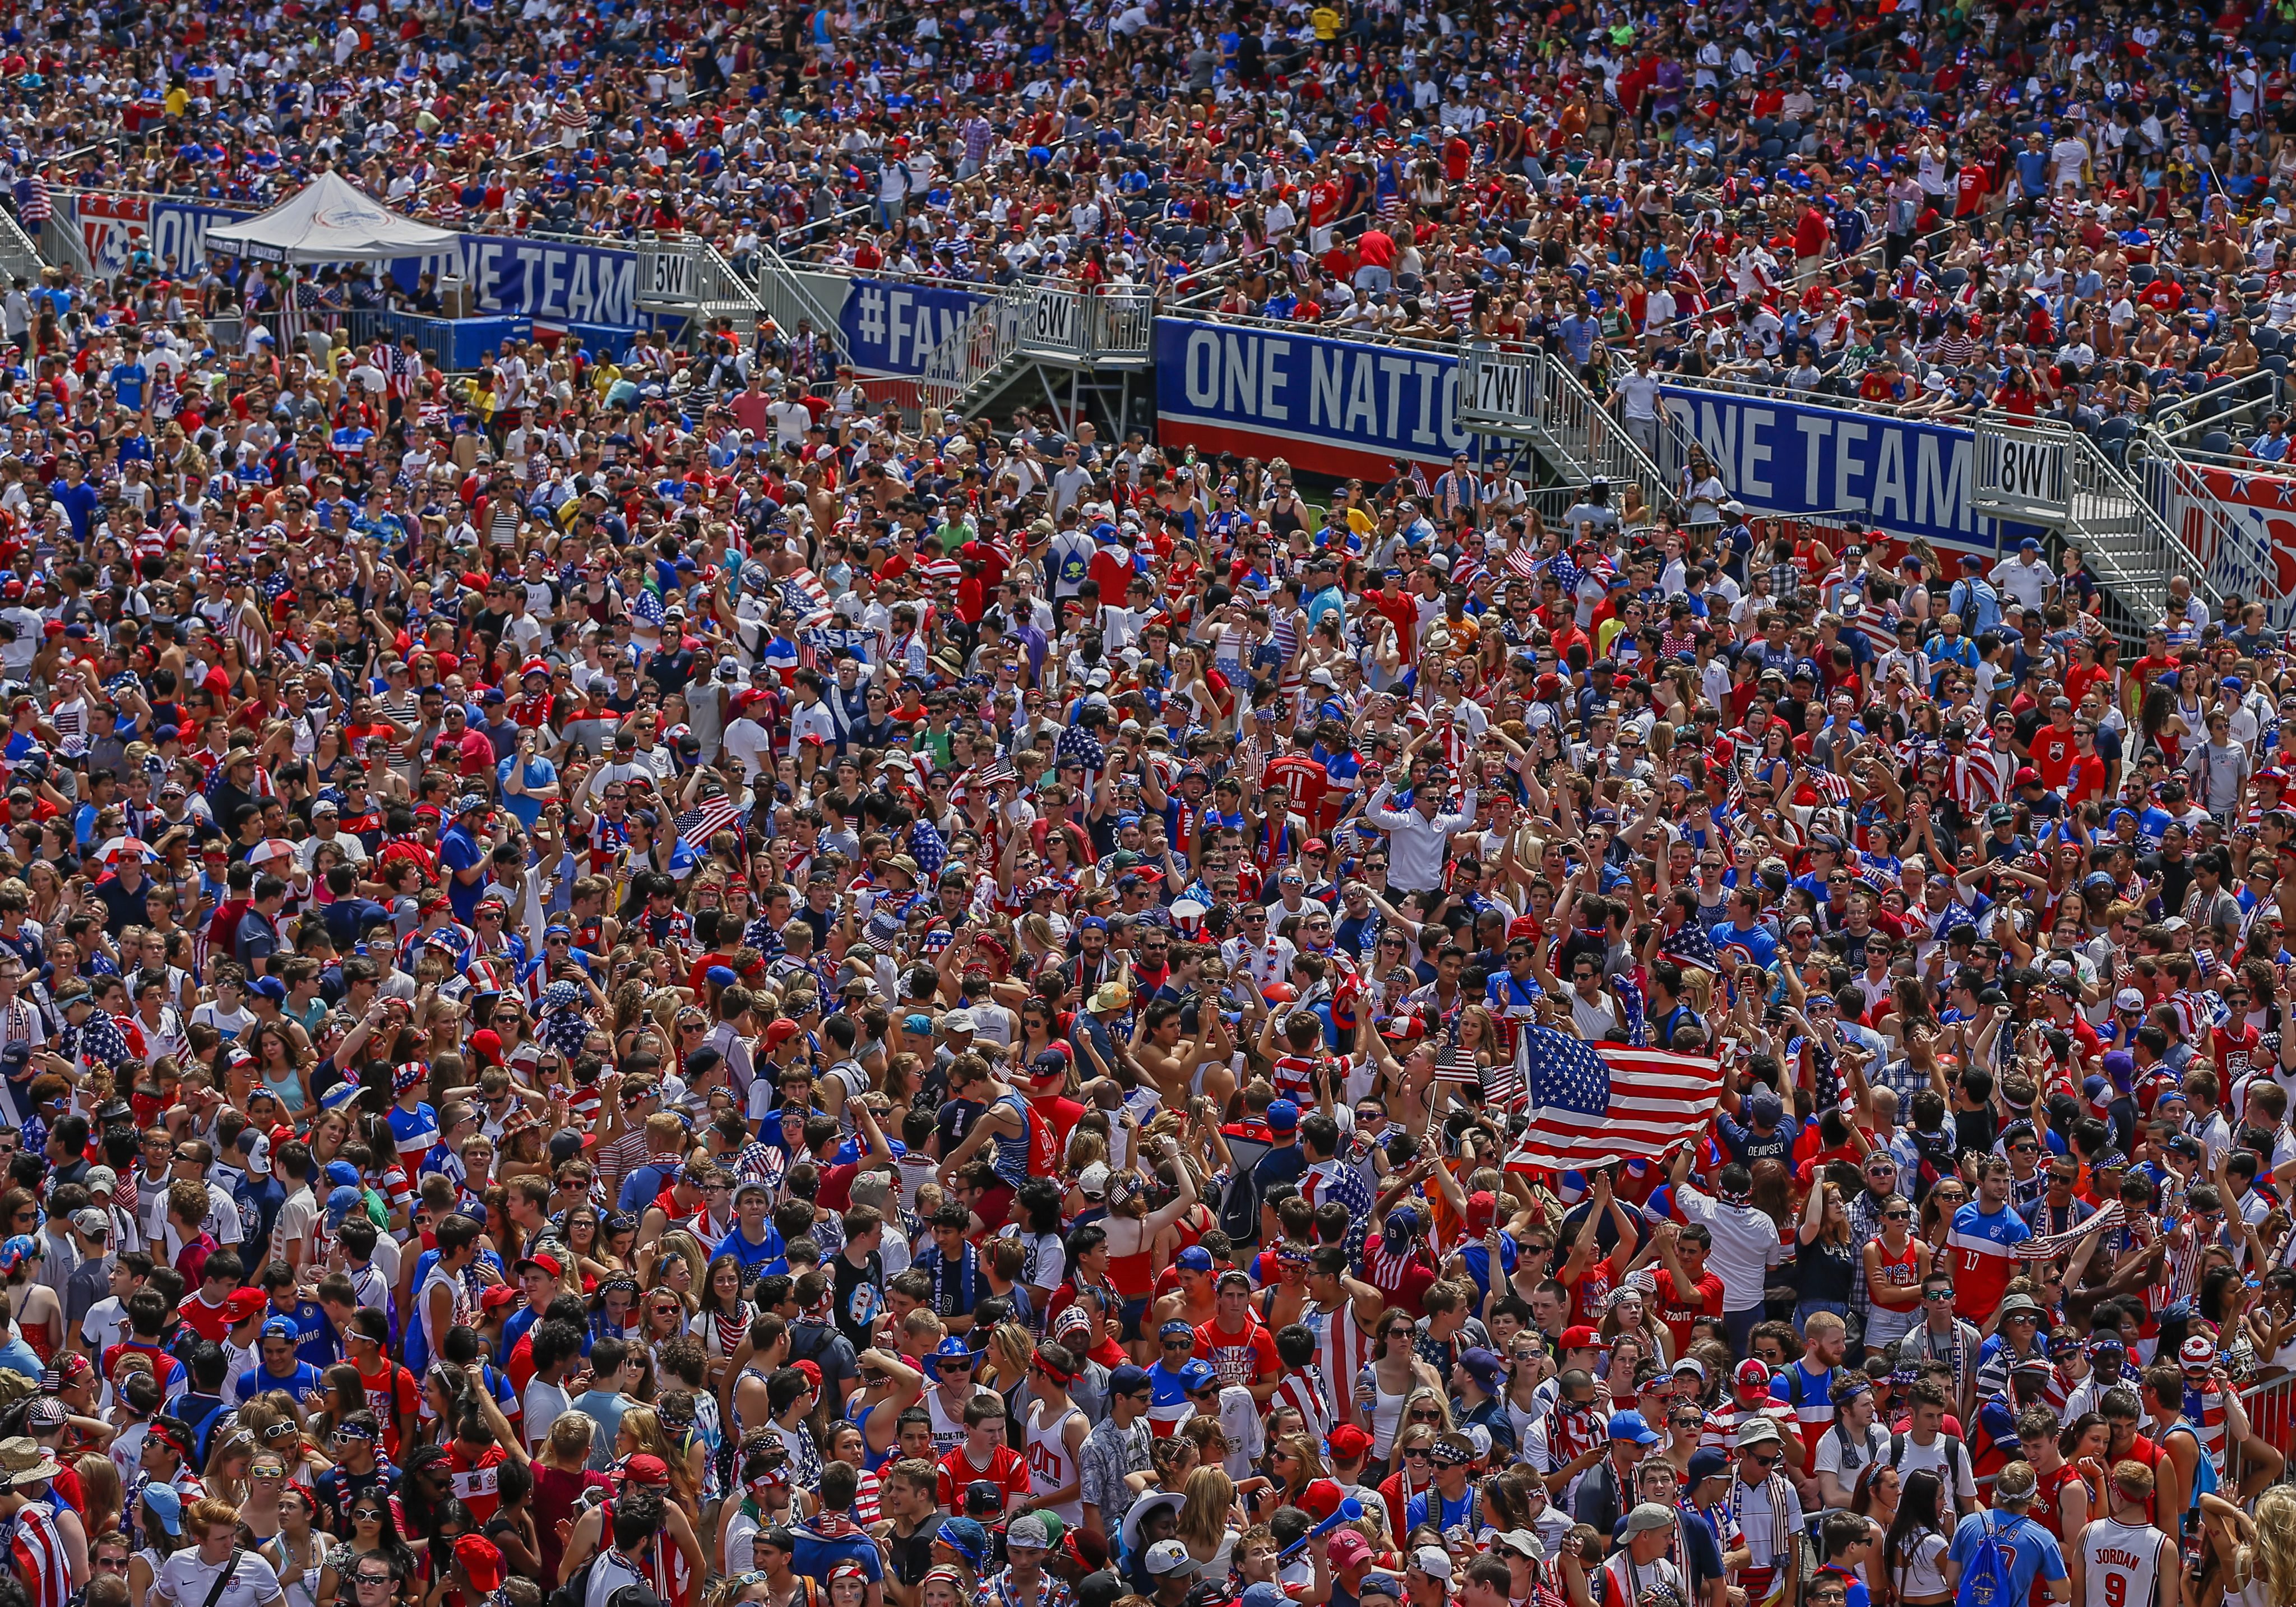 US fans cheer during a screening of the match between the USA and Belgium played at the Arena Fonte Nova in Salvador, Brazil, at Soldier Field in Chicago, Illinois on July 1, 2014.